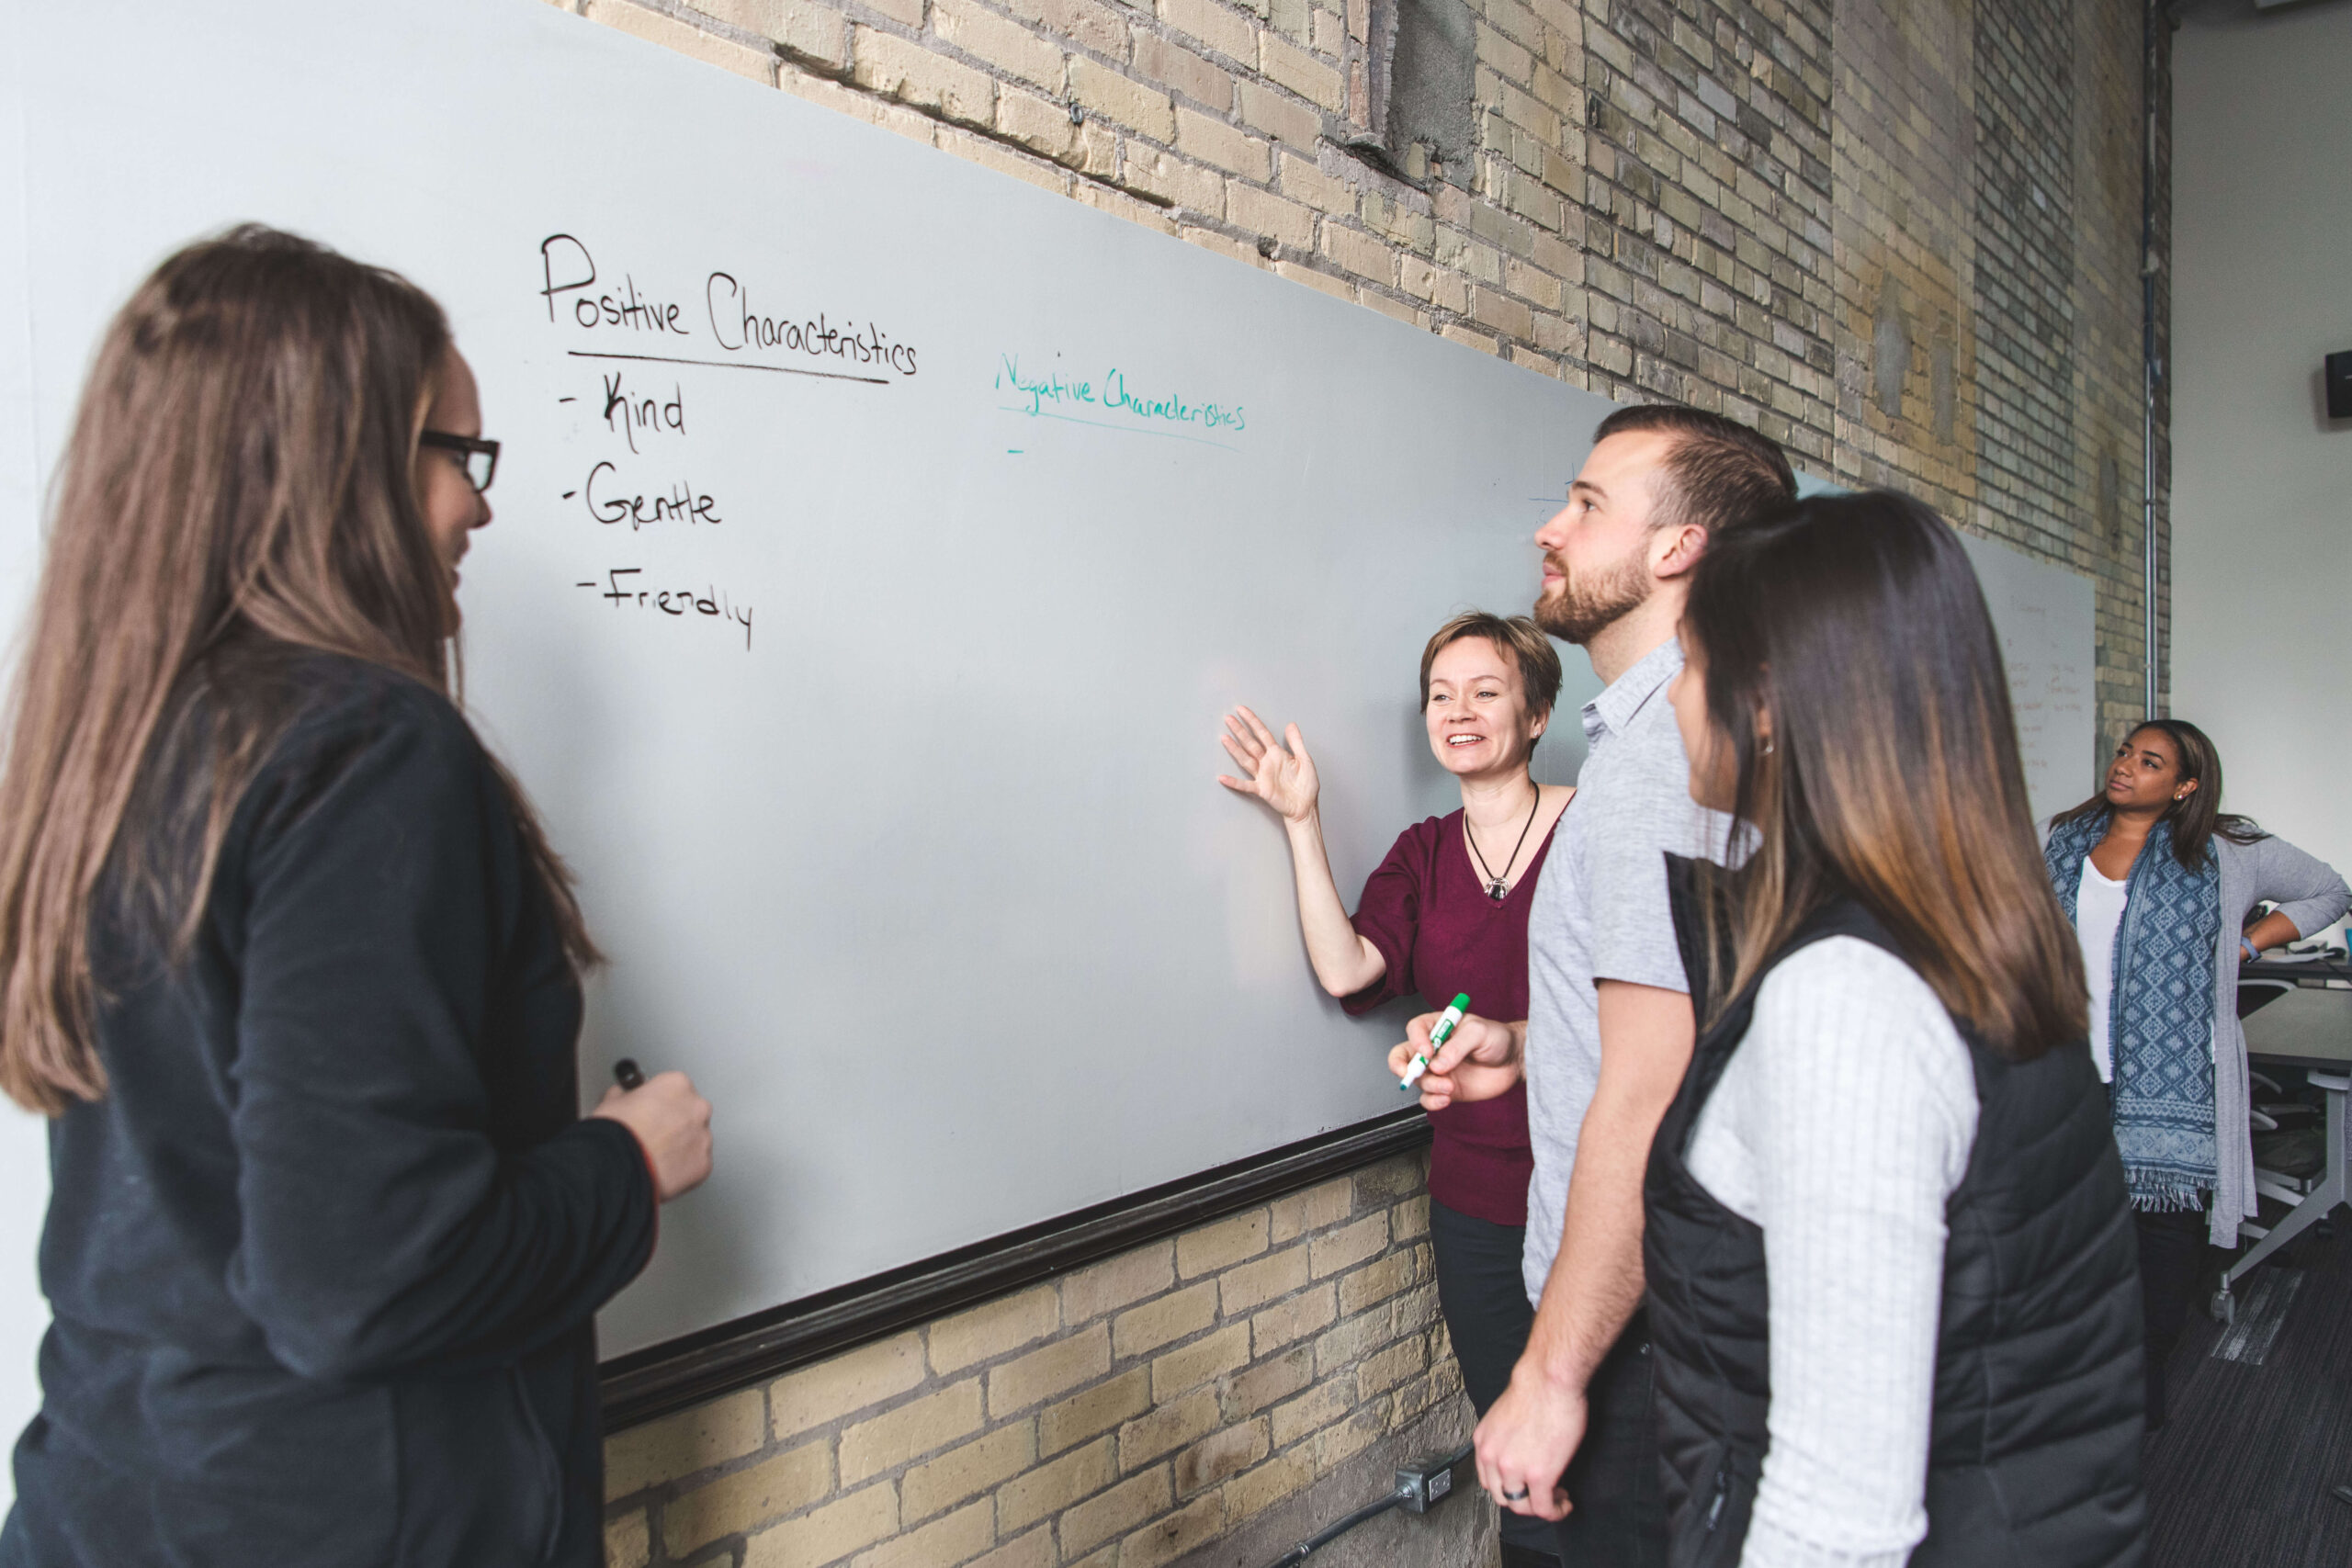 group-of-people-in-training-course-discussing-idea-at-whiteboard